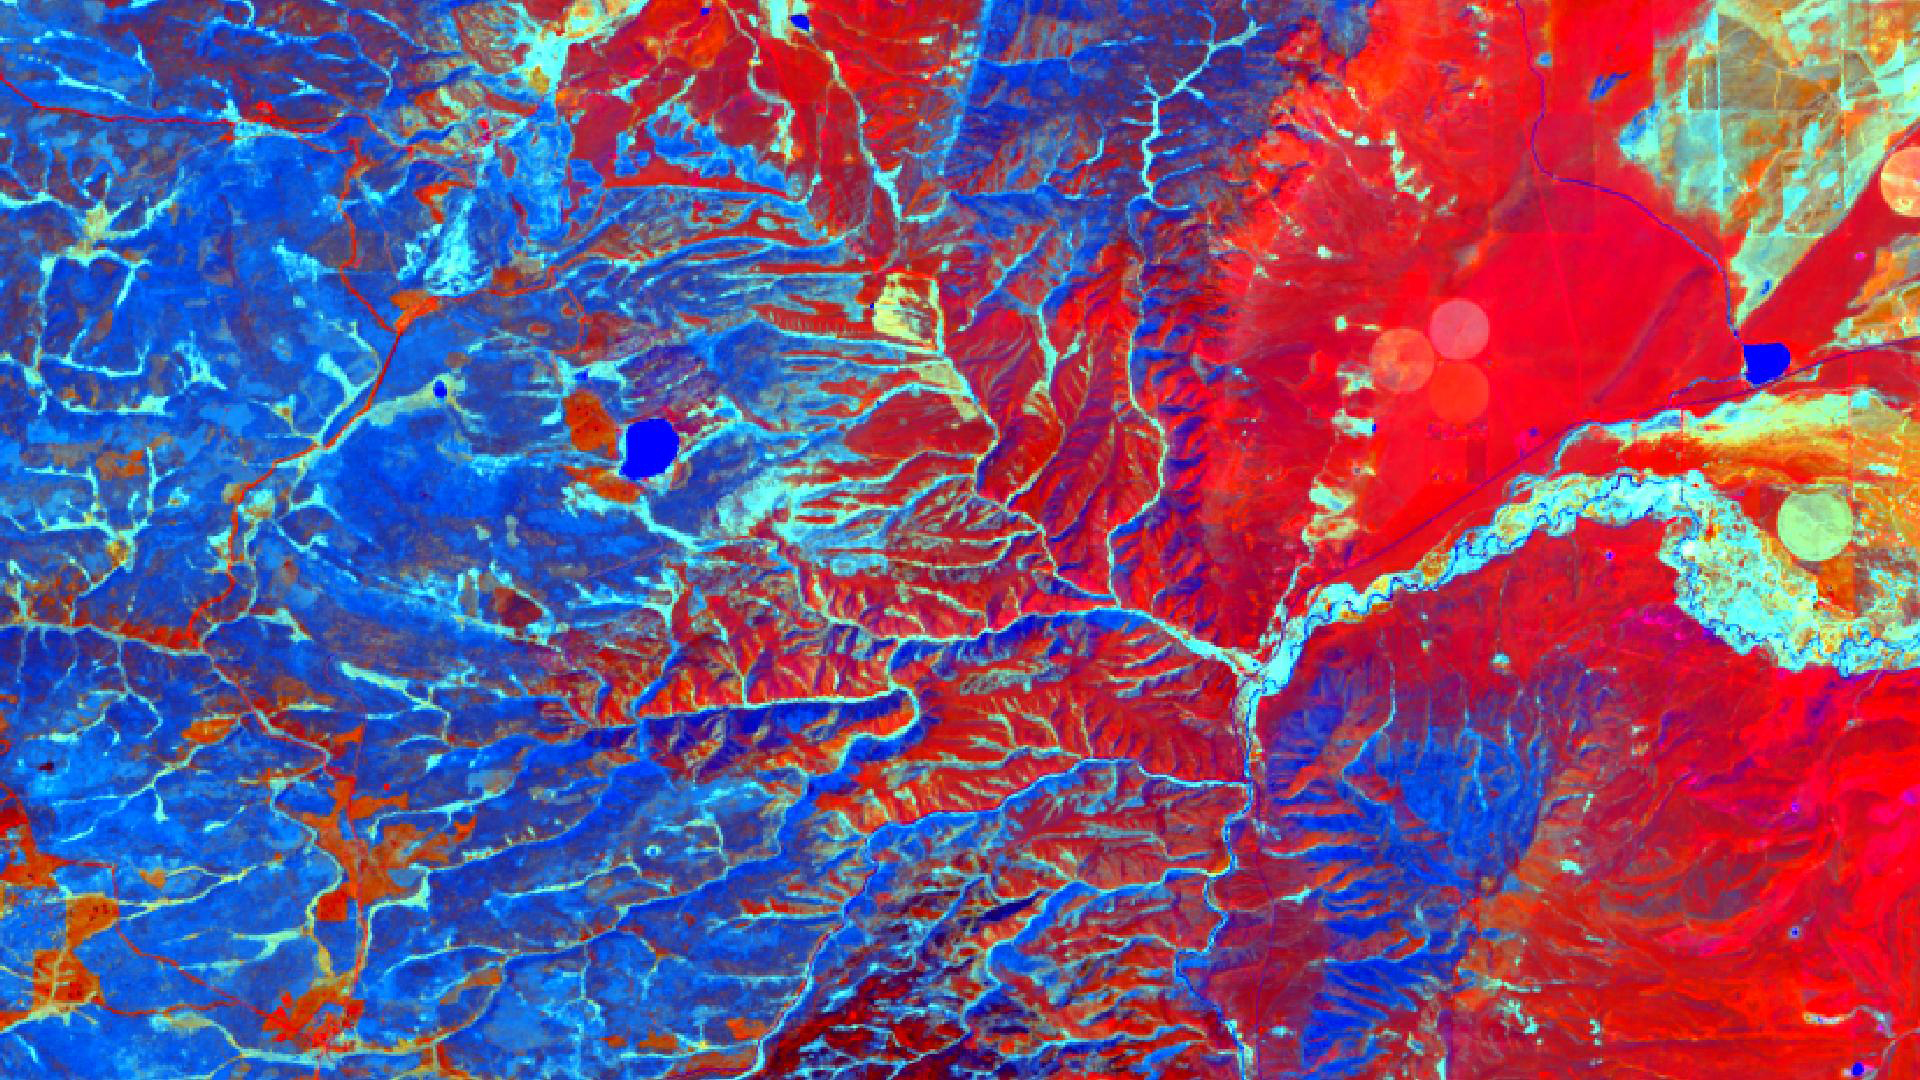 September 2nd, 2019 Multiband Tasseled cap Landsat 8 OLI image over Medicine Bow National Forest in Wyoming. Dark blue represents higher values of wetness, dark red represents higher values of combined green, red, and blue light reflectance and cyan represents higher values of greenness and wetness. Tasseled cap wetness was one of the most important predictor variables used in machine learning models to detect invasive cheatgrass (Bromus tectorum).Keywords: Spectral index, remote sensing